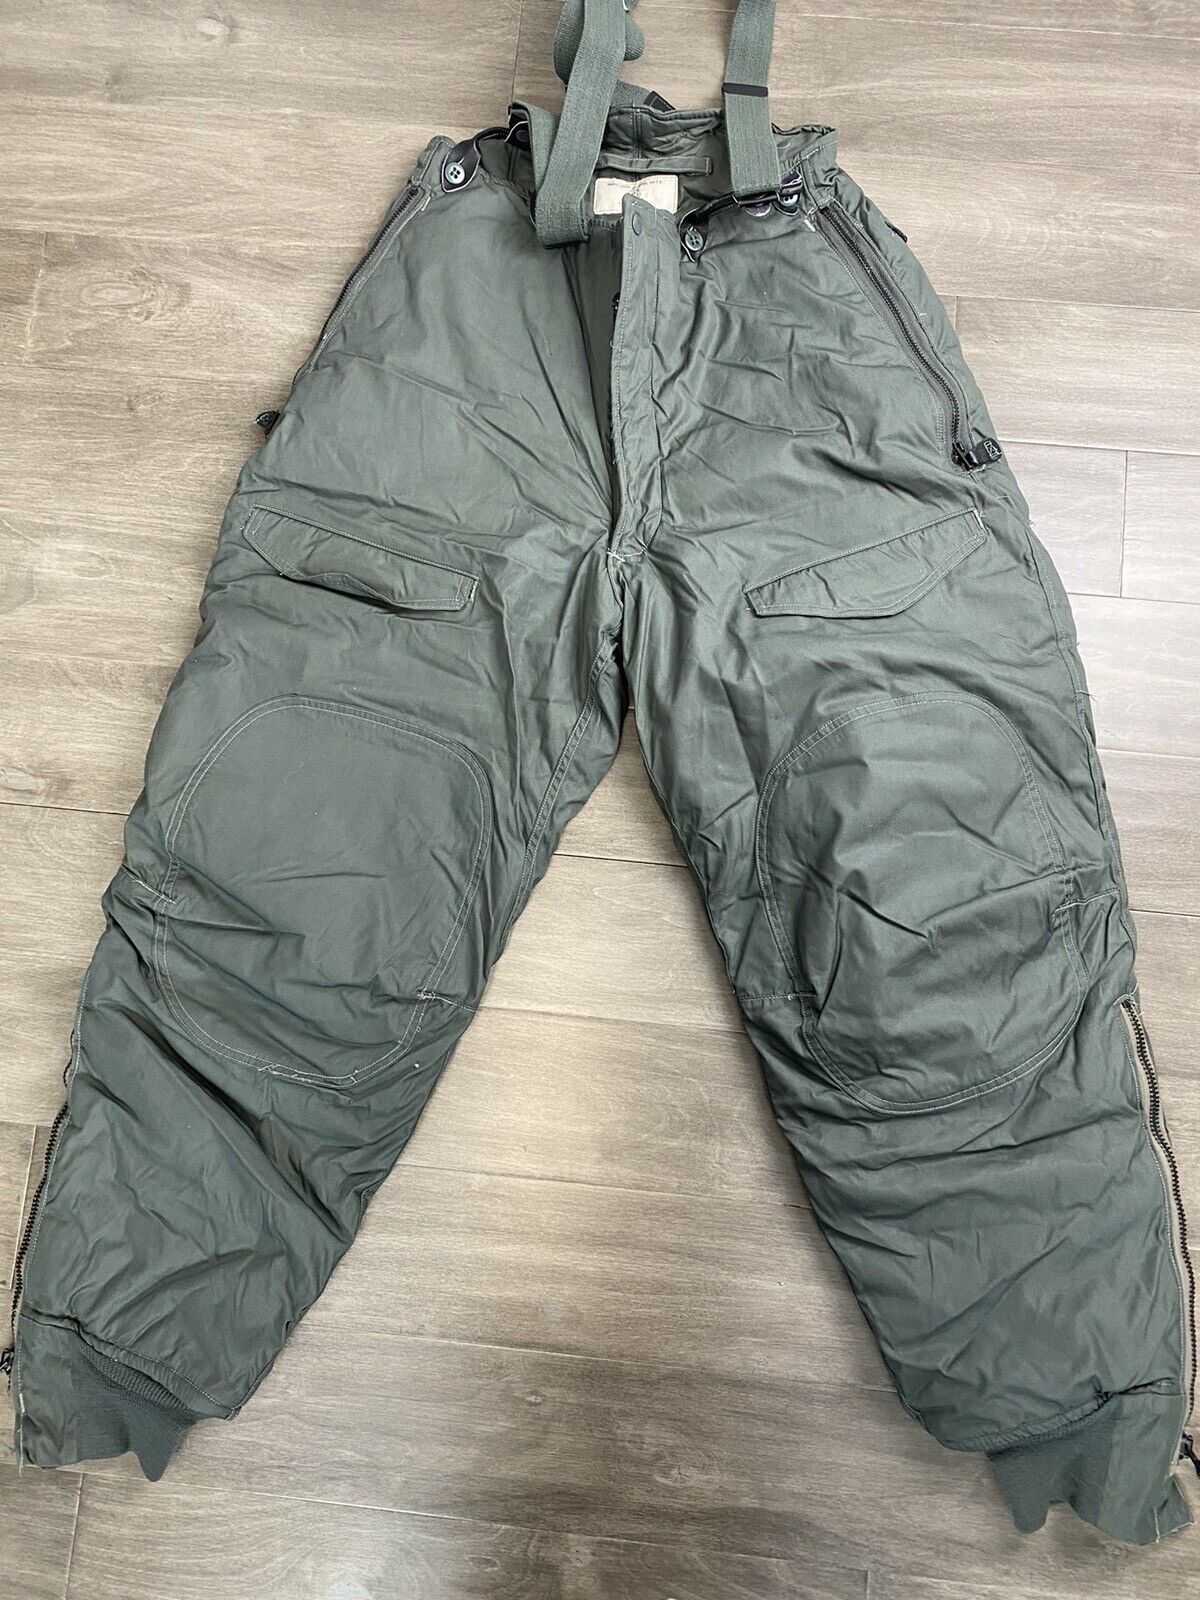 Size 32 - US Air Force Extreme Cold Weather Type F-1B F1B Pants Trousers USAF